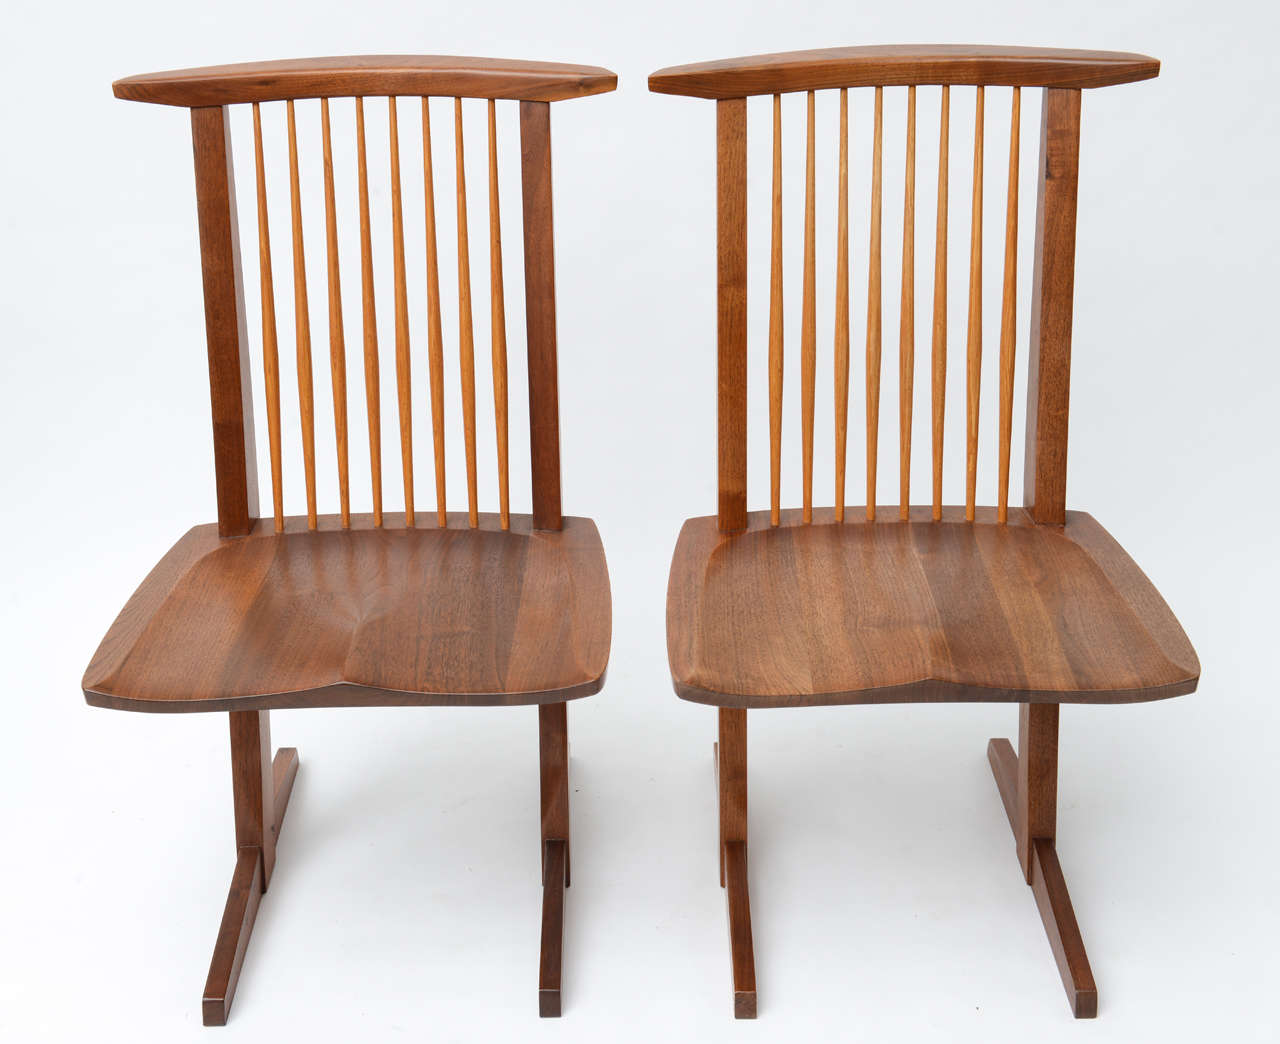 George Nakashima conoid dining chairs
A set of 4,original finish marked with the clients name.